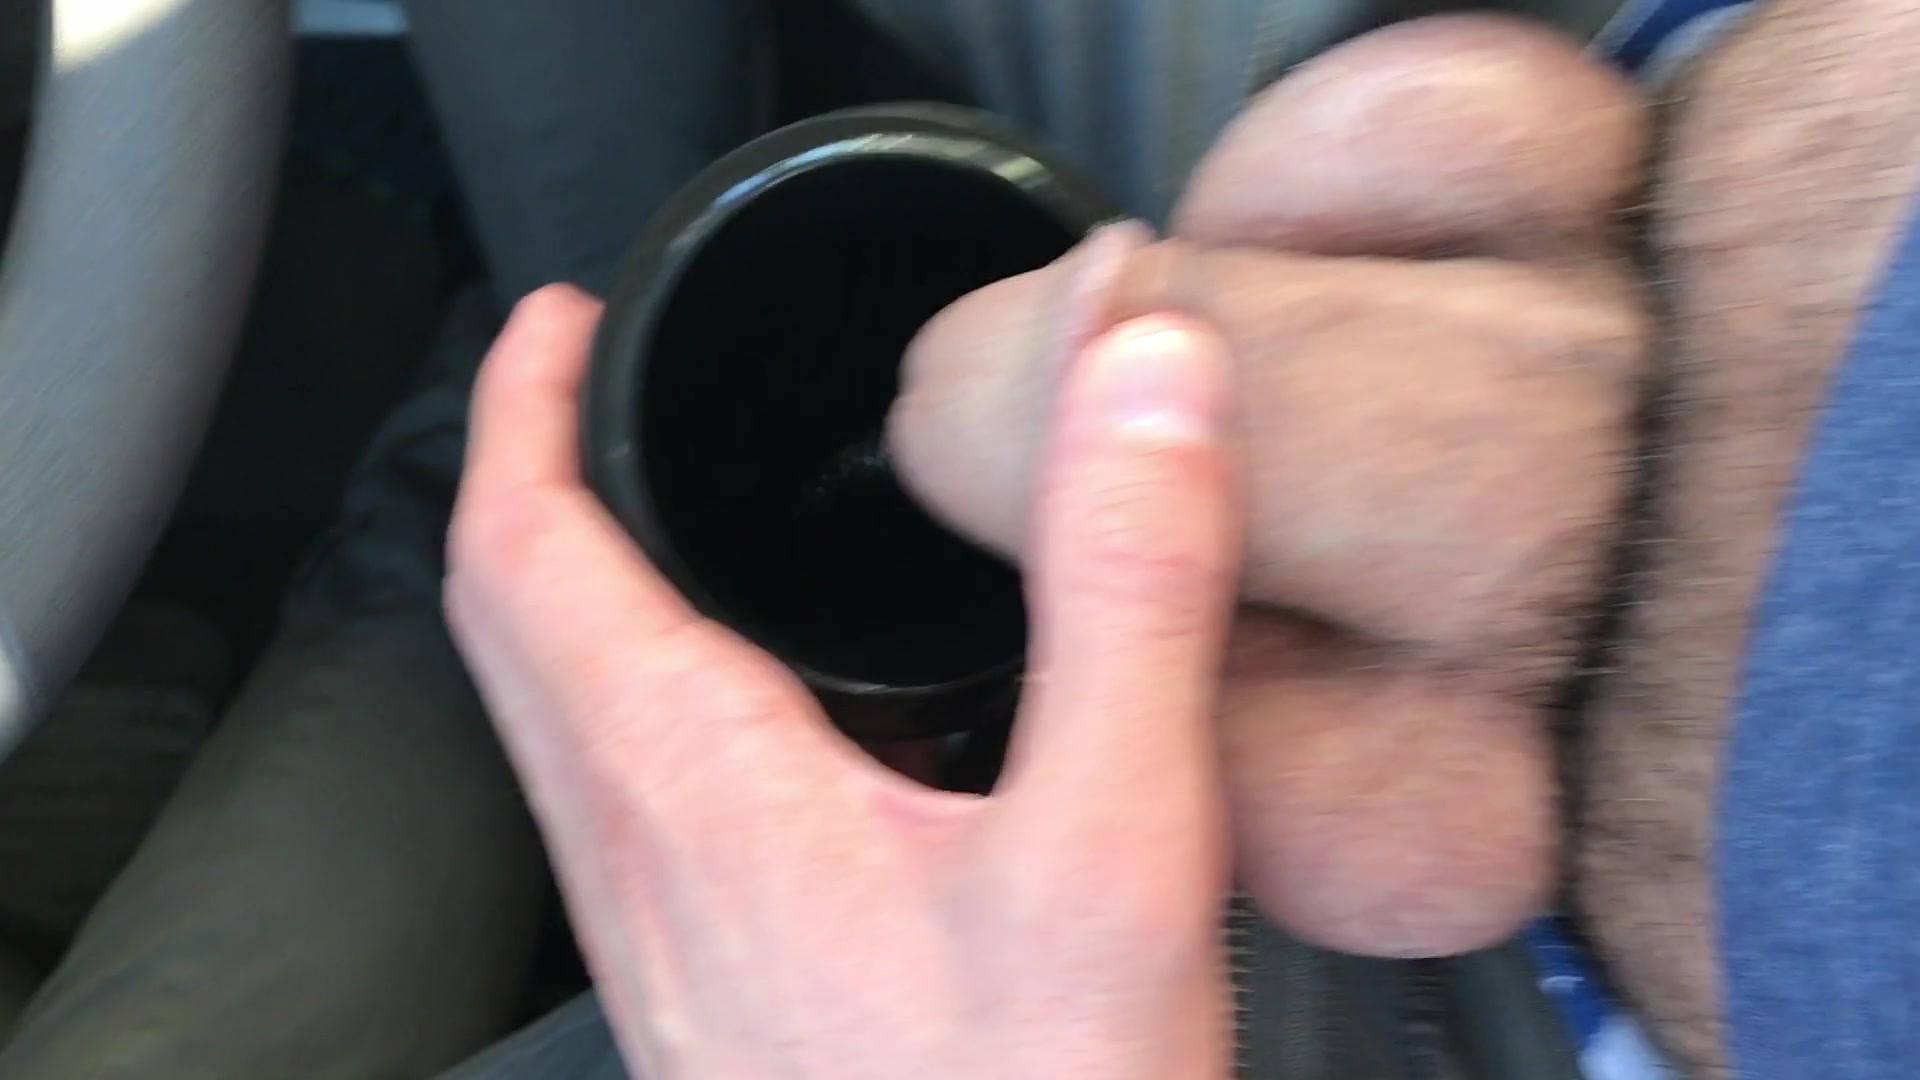 Pissing in a cup in the car